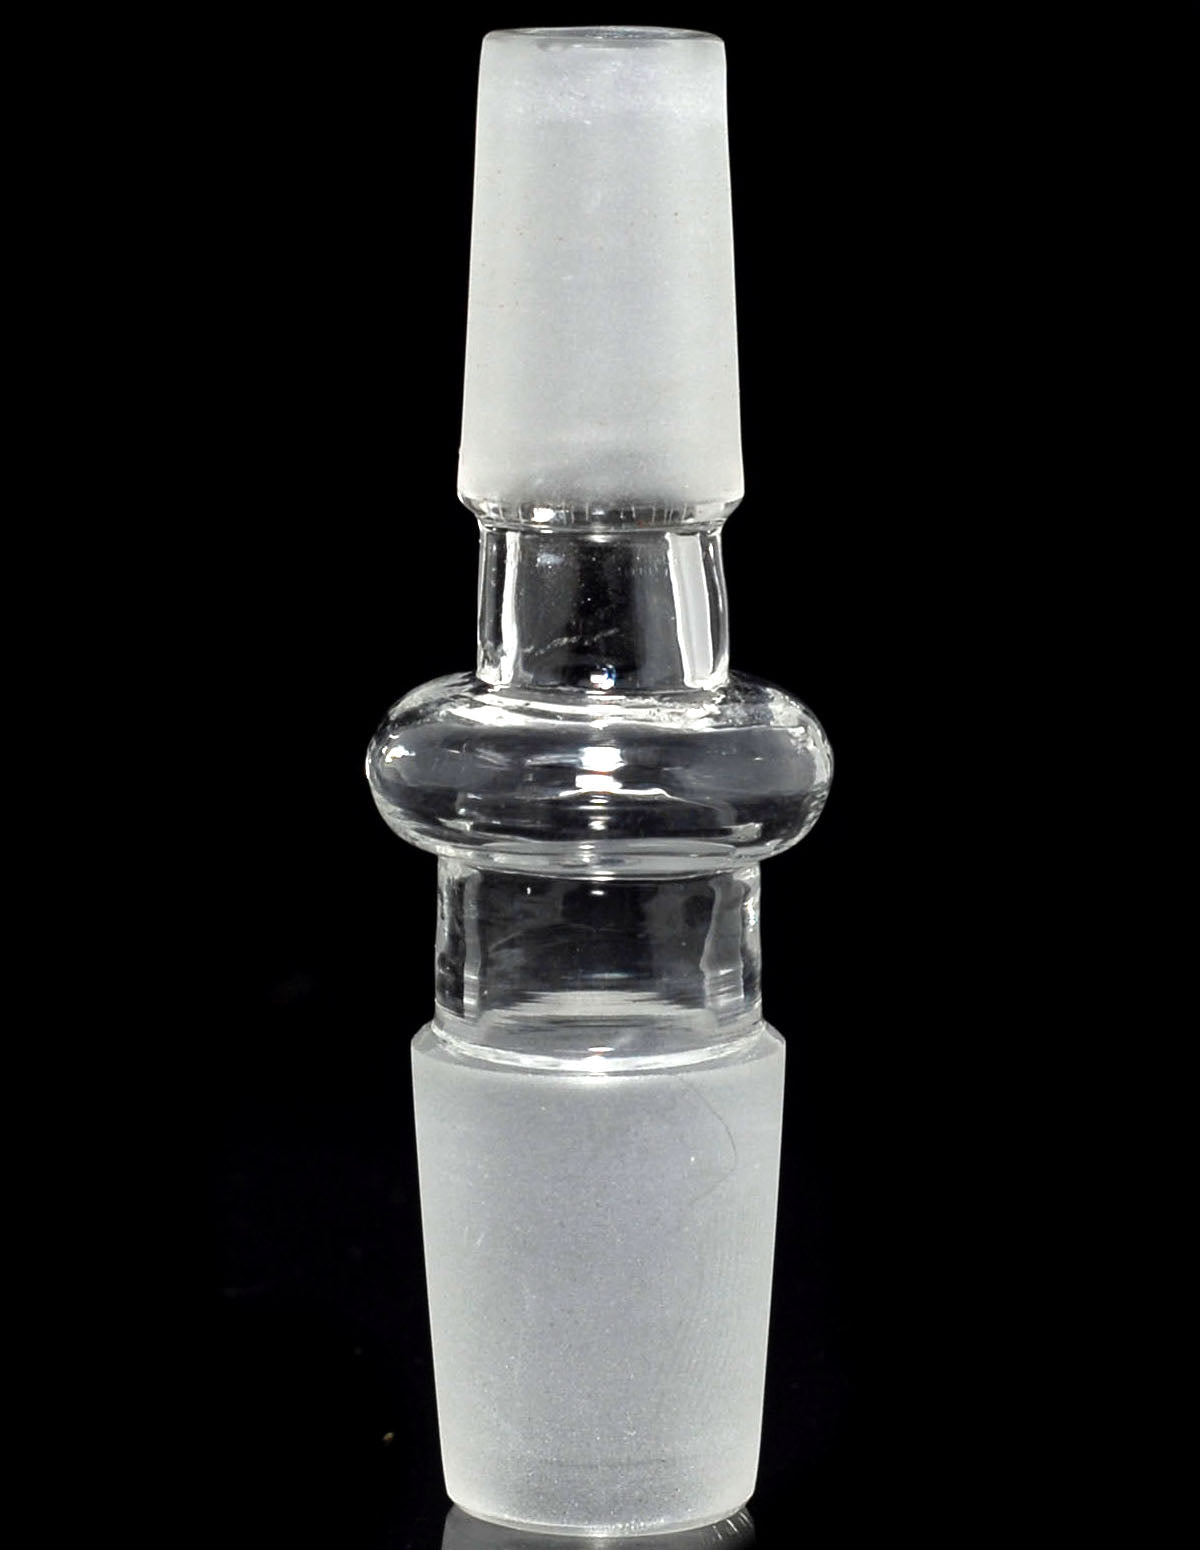 14 Male and 18 Male Glass on Glass converter adapter